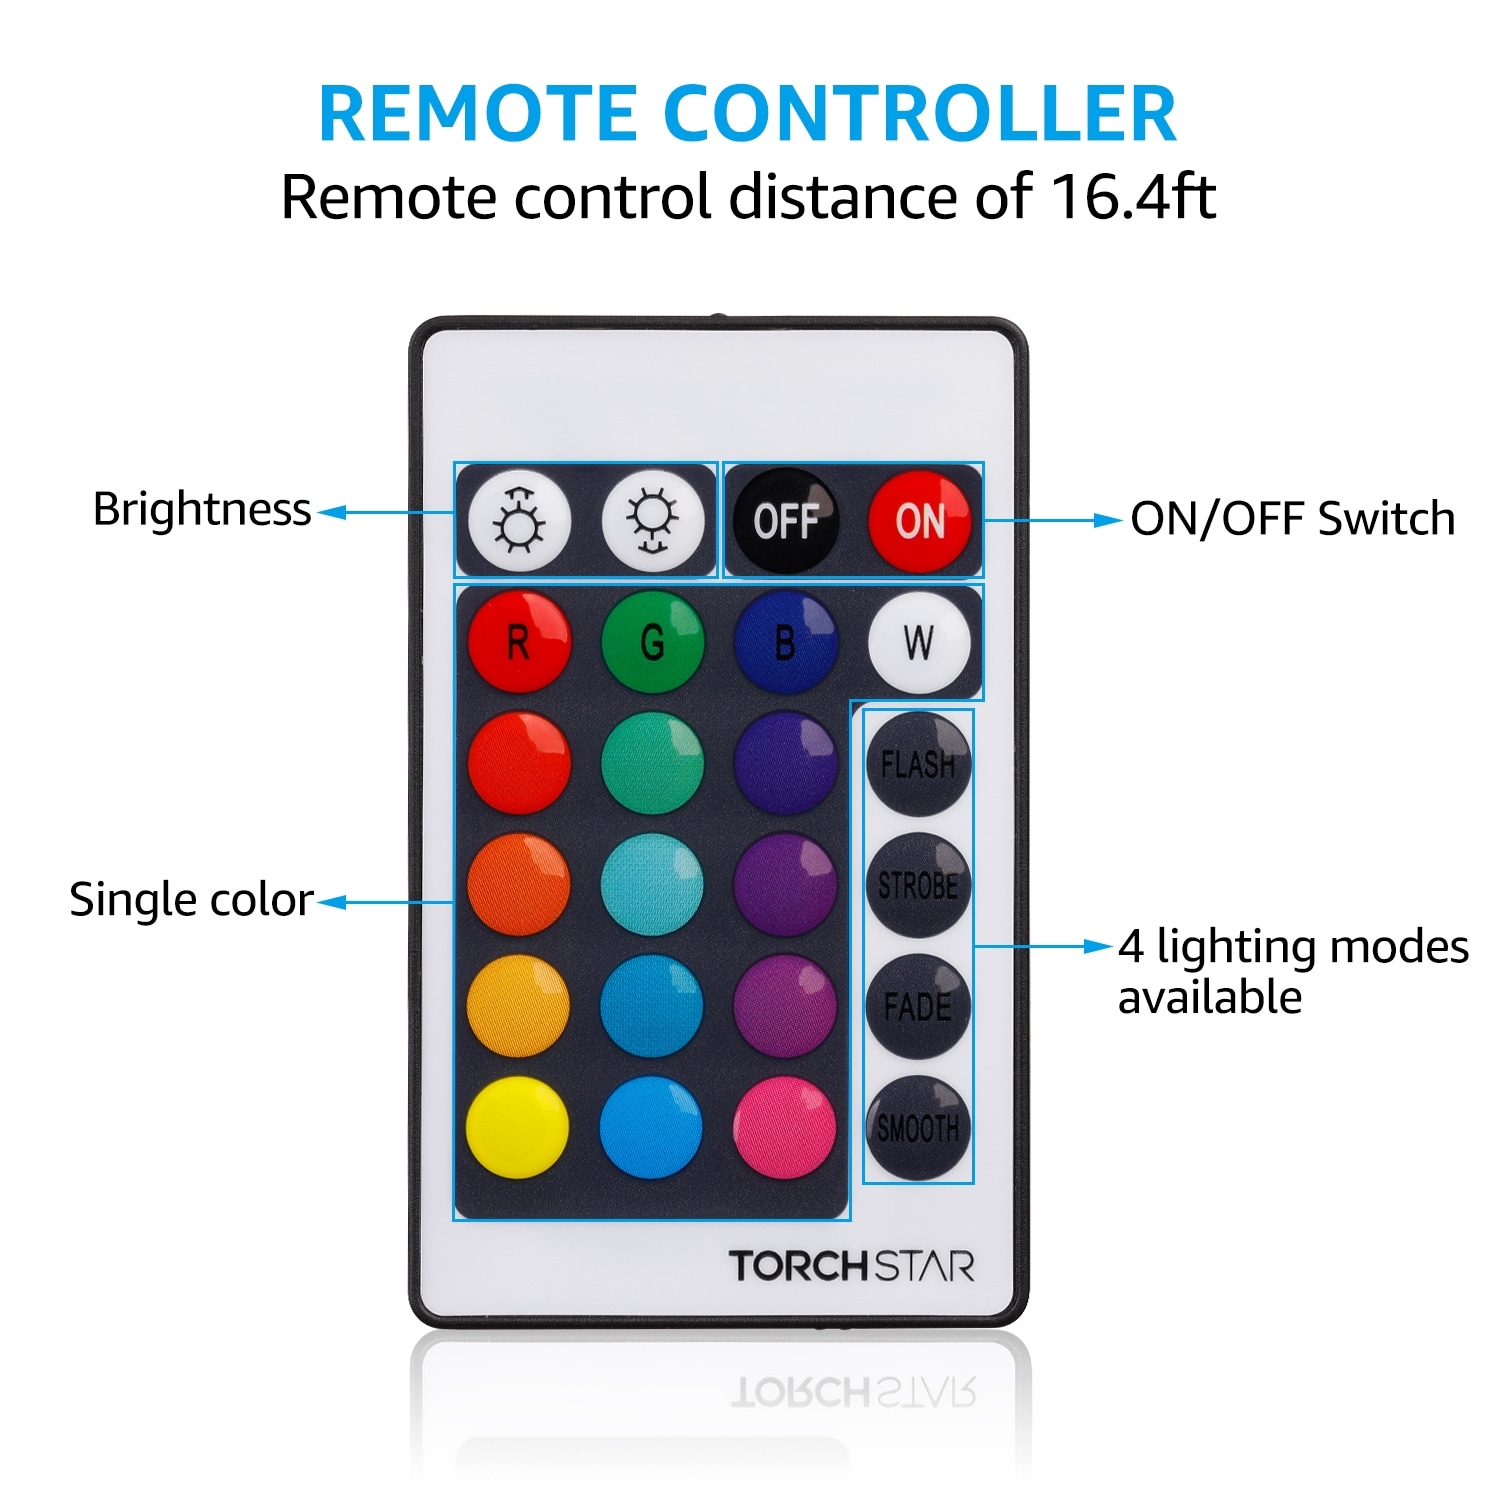 Submersible Battery Operated Multi-Function LED Lights with Remote Control  - Set of 10